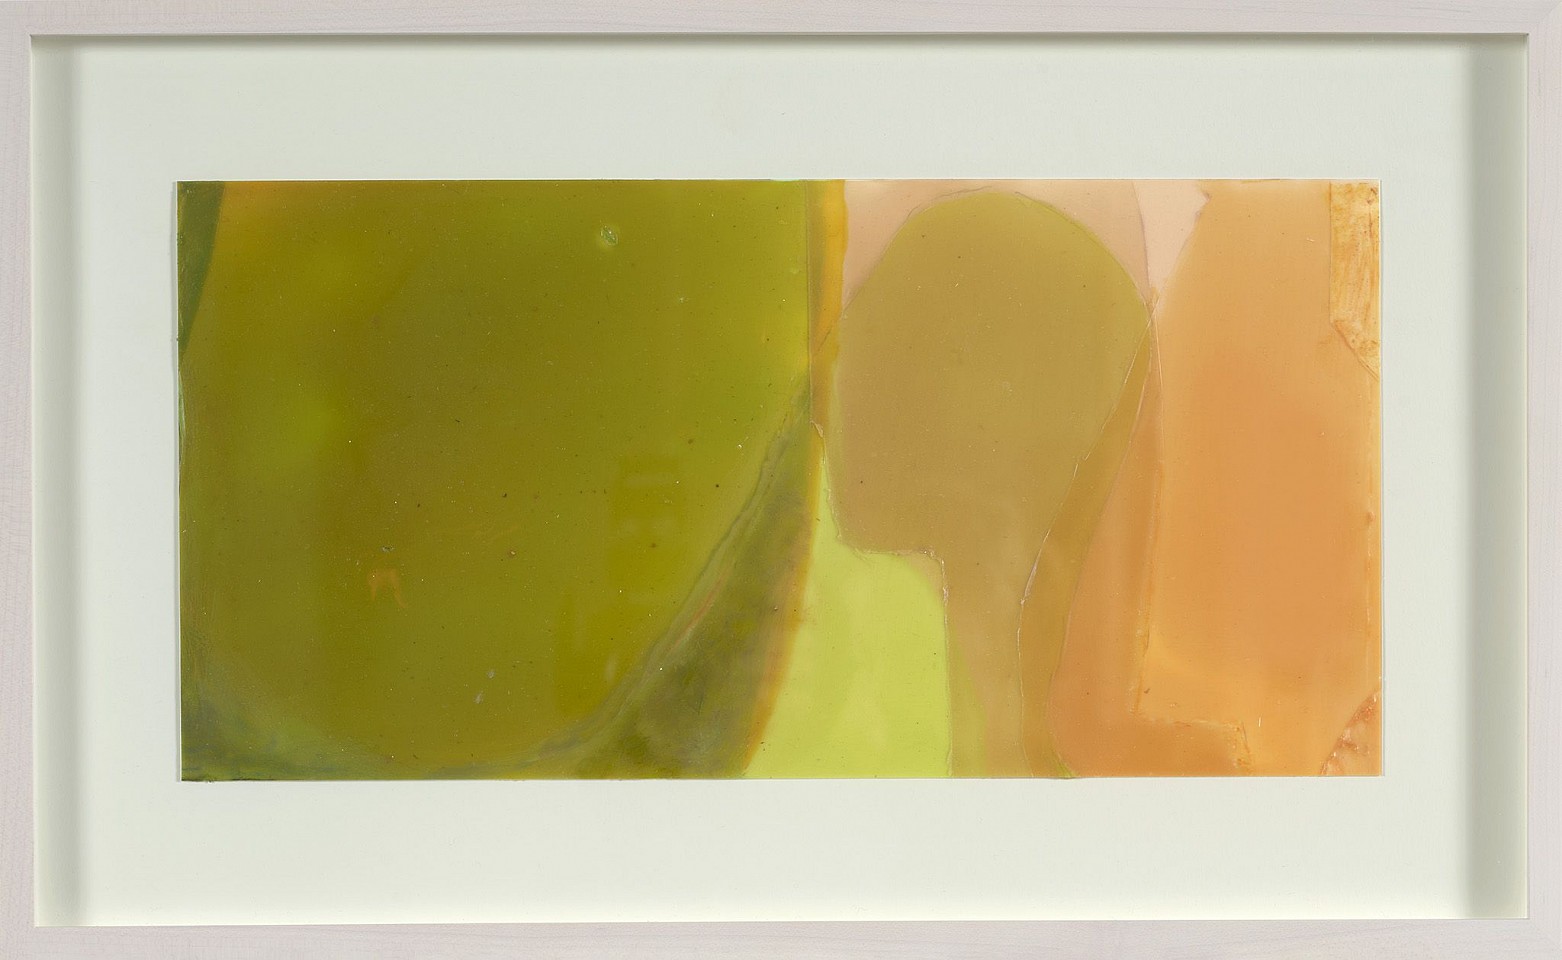 Jill Nathanson, Untitled, 2023
Acrylic with polymers and oil on Yupo, 8 3/4 x 17 1/2 in. (22.2 x 44.5 cm)
NAT-00162